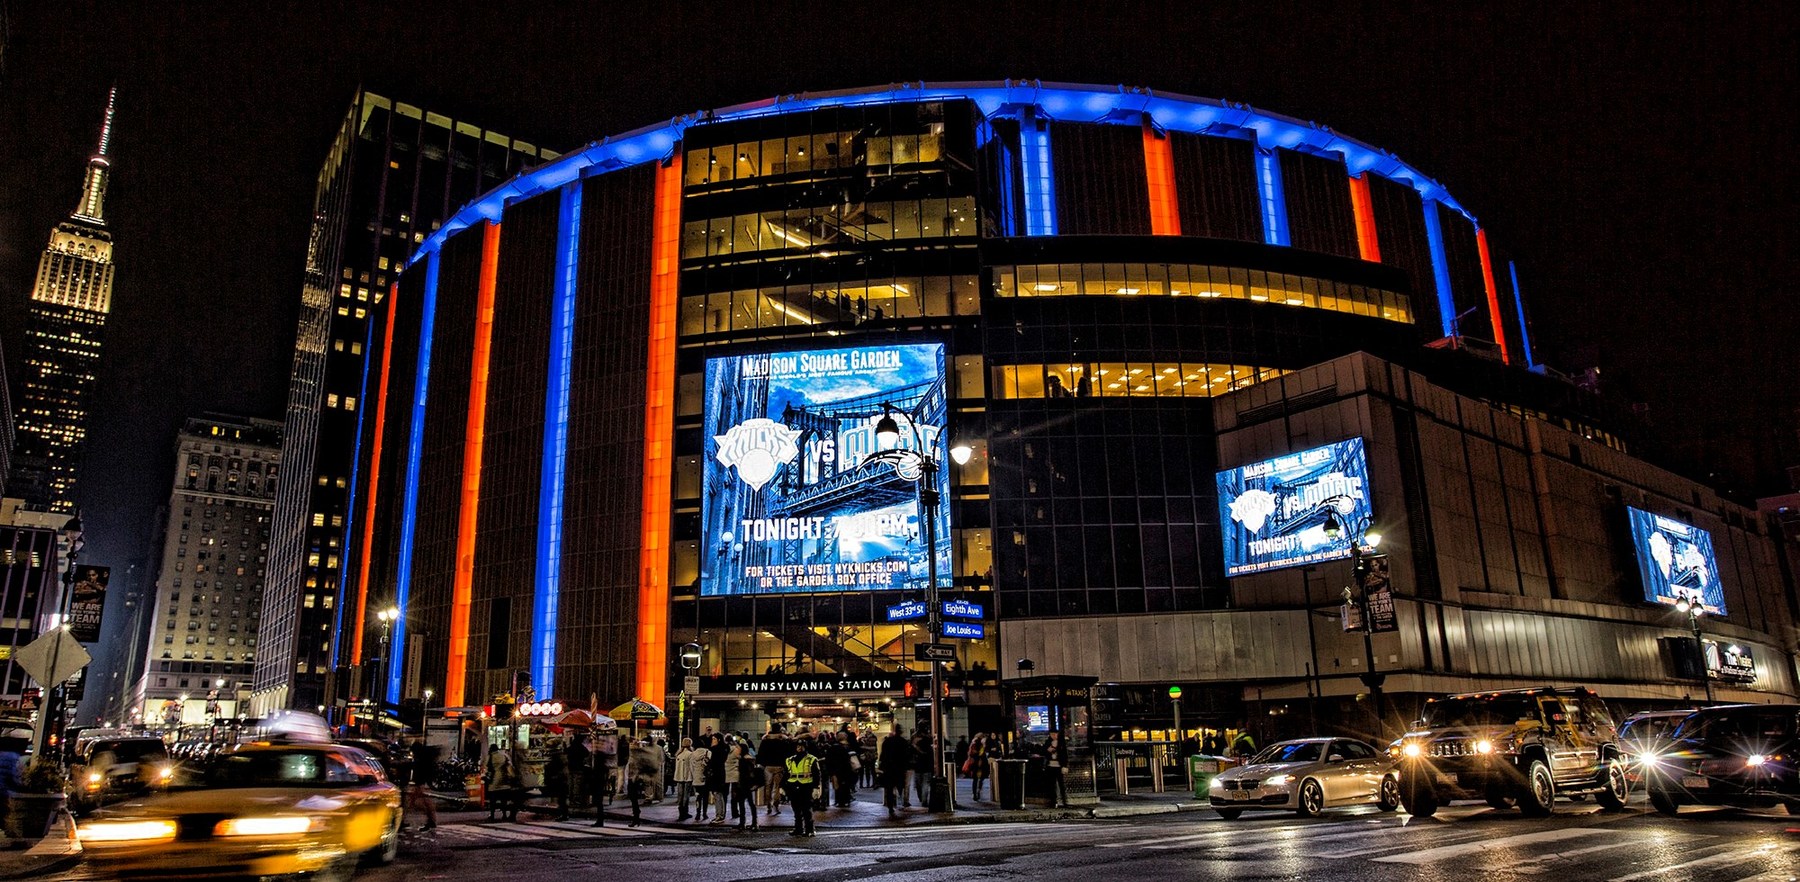 exterior of Madison Square Garden in New York